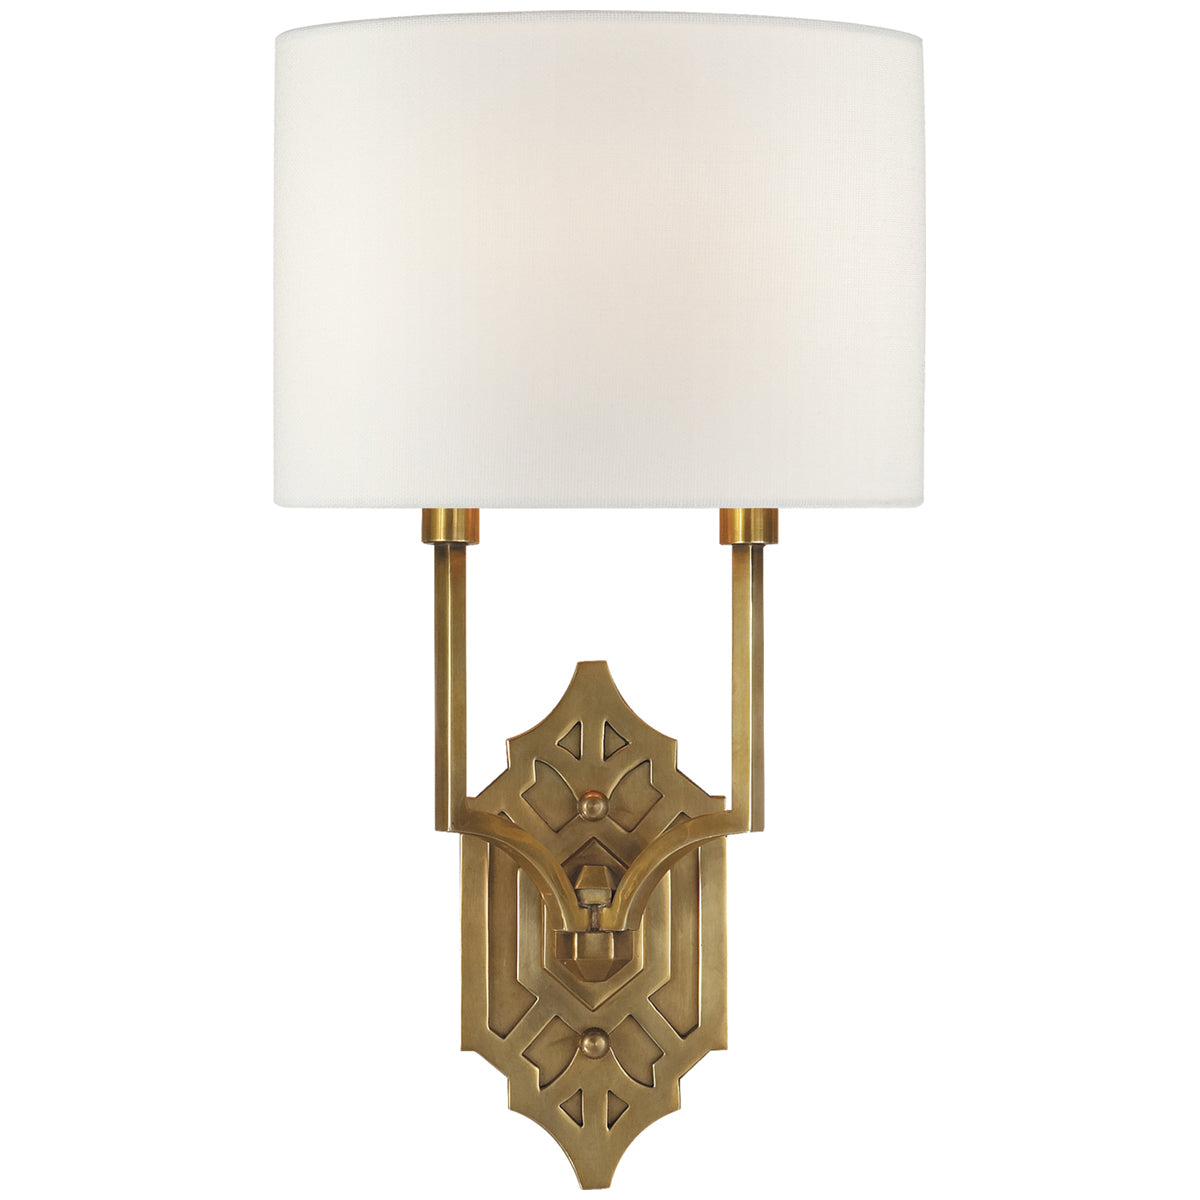 Visual Comfort Silhouette Fretwork Sconce with Linen Shade